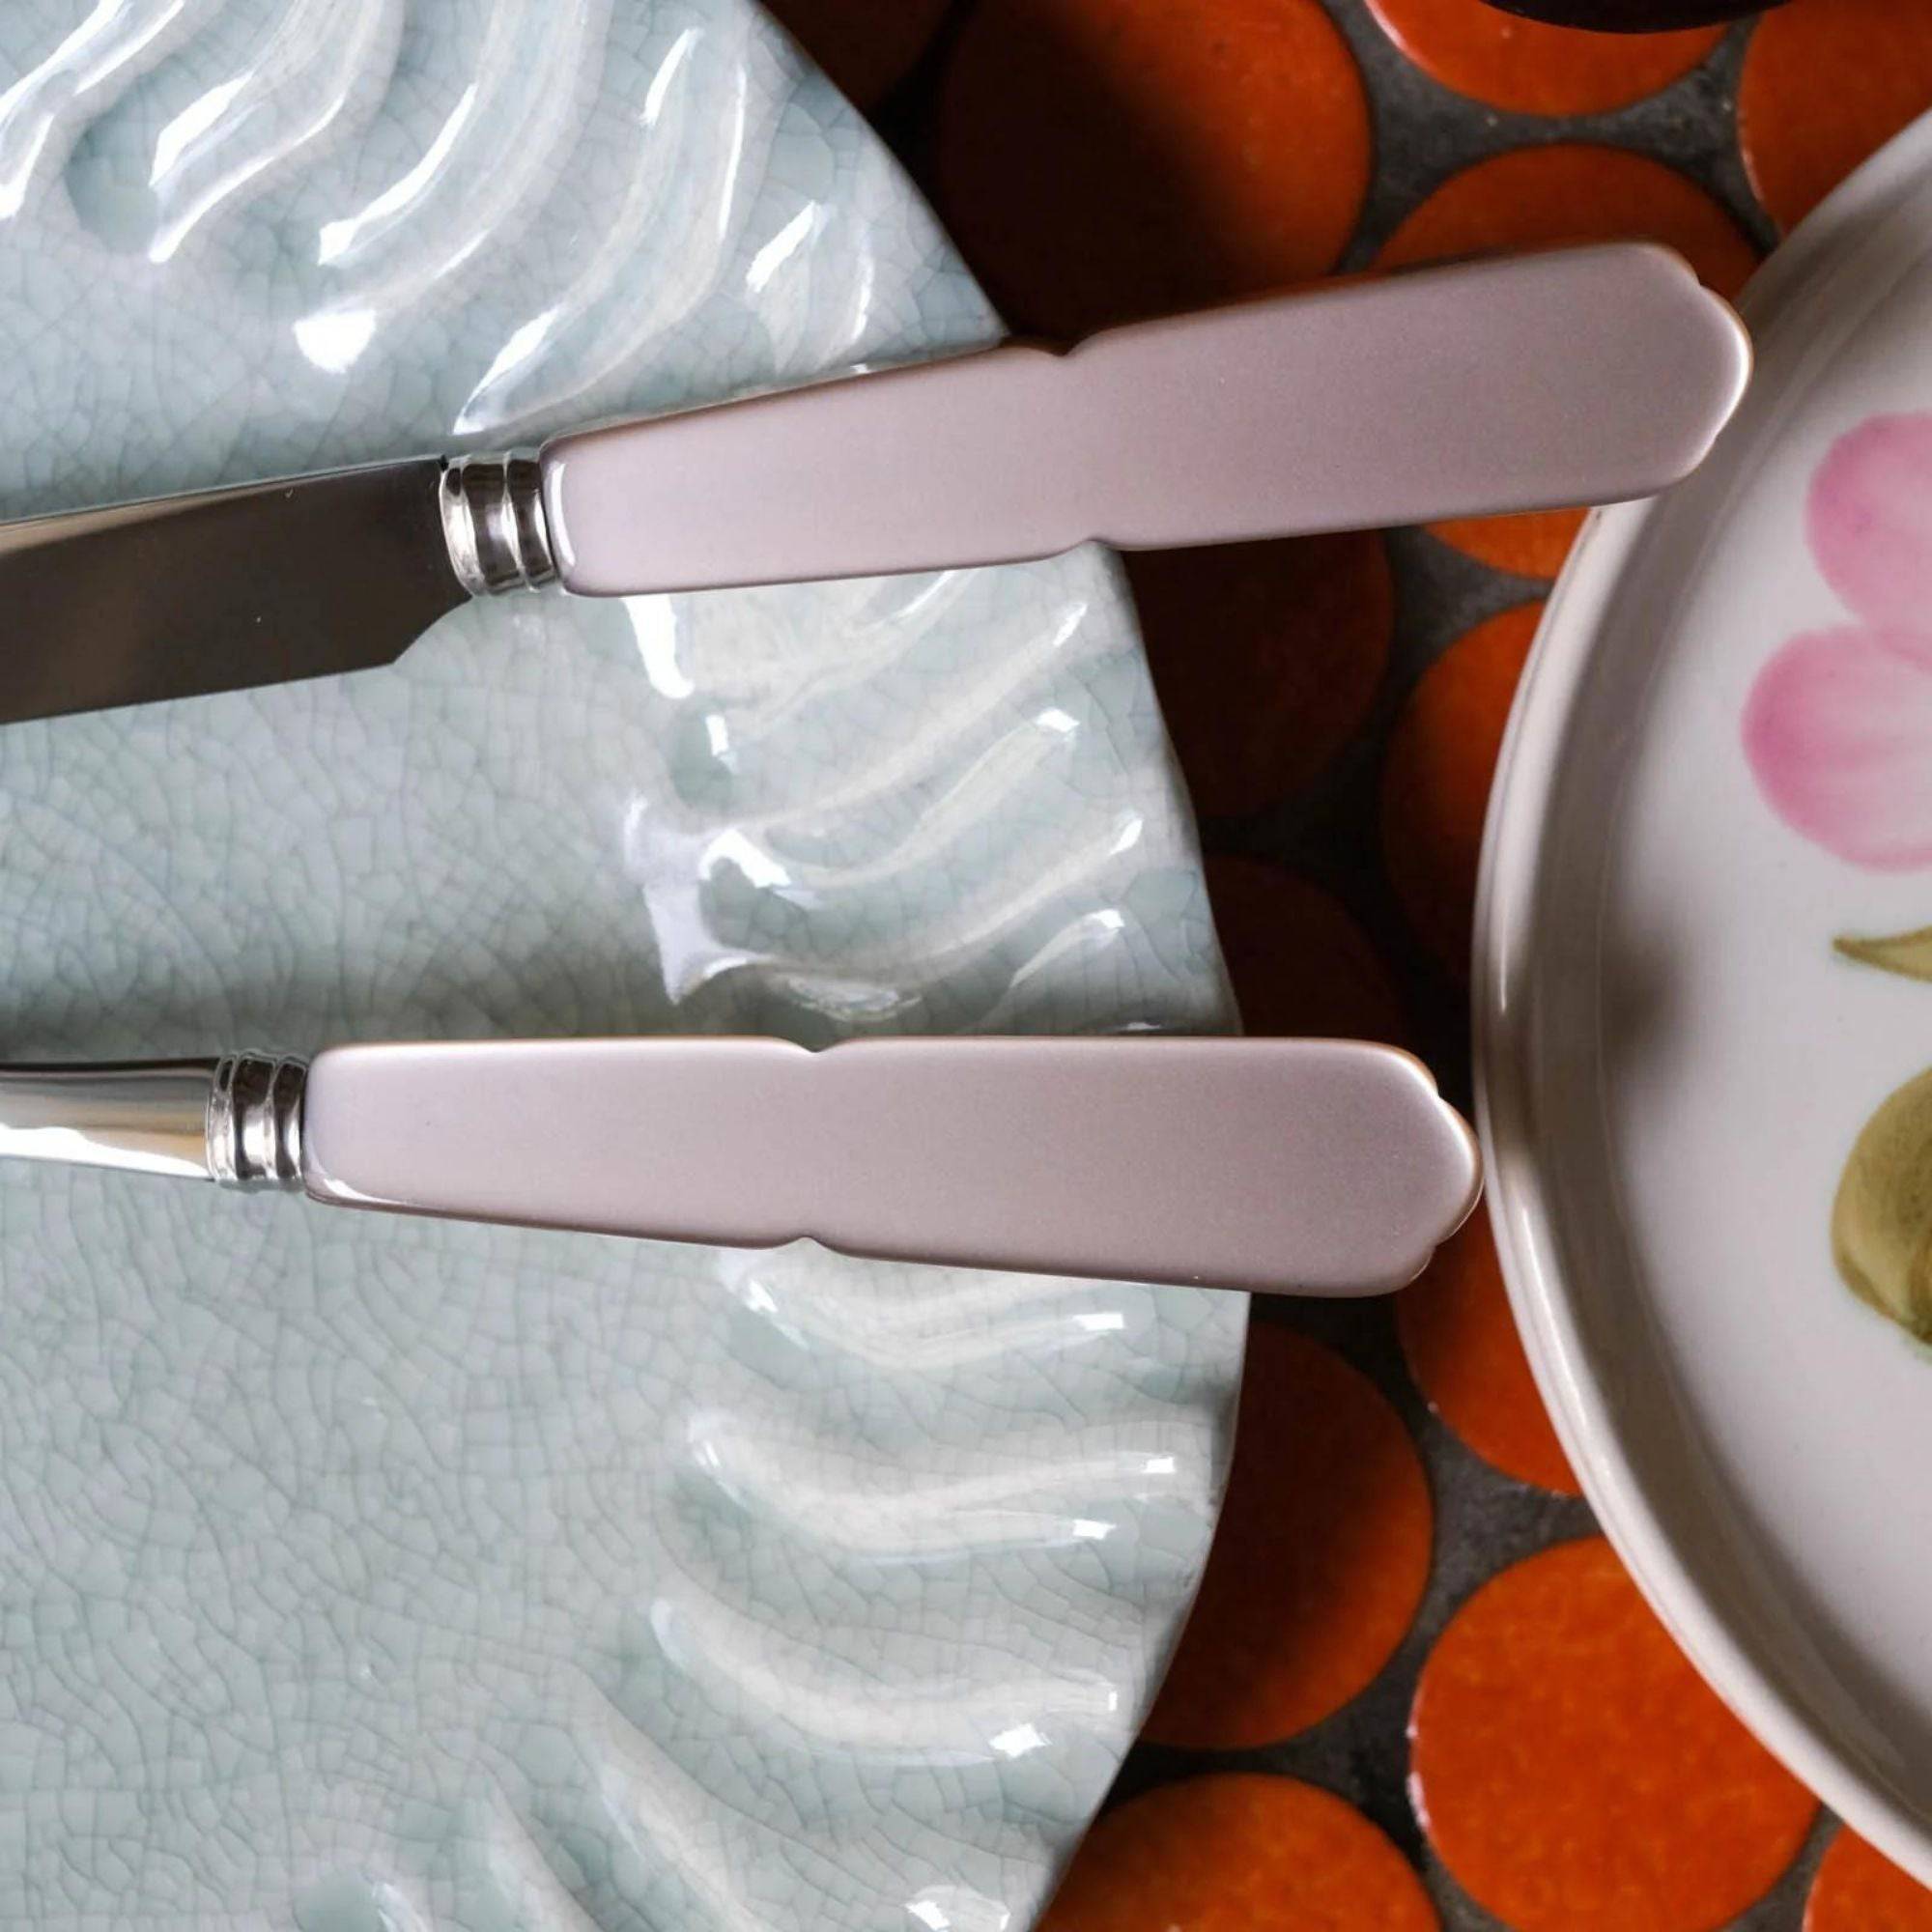 Gustave Cutlery Set - THAT COOL LIVING